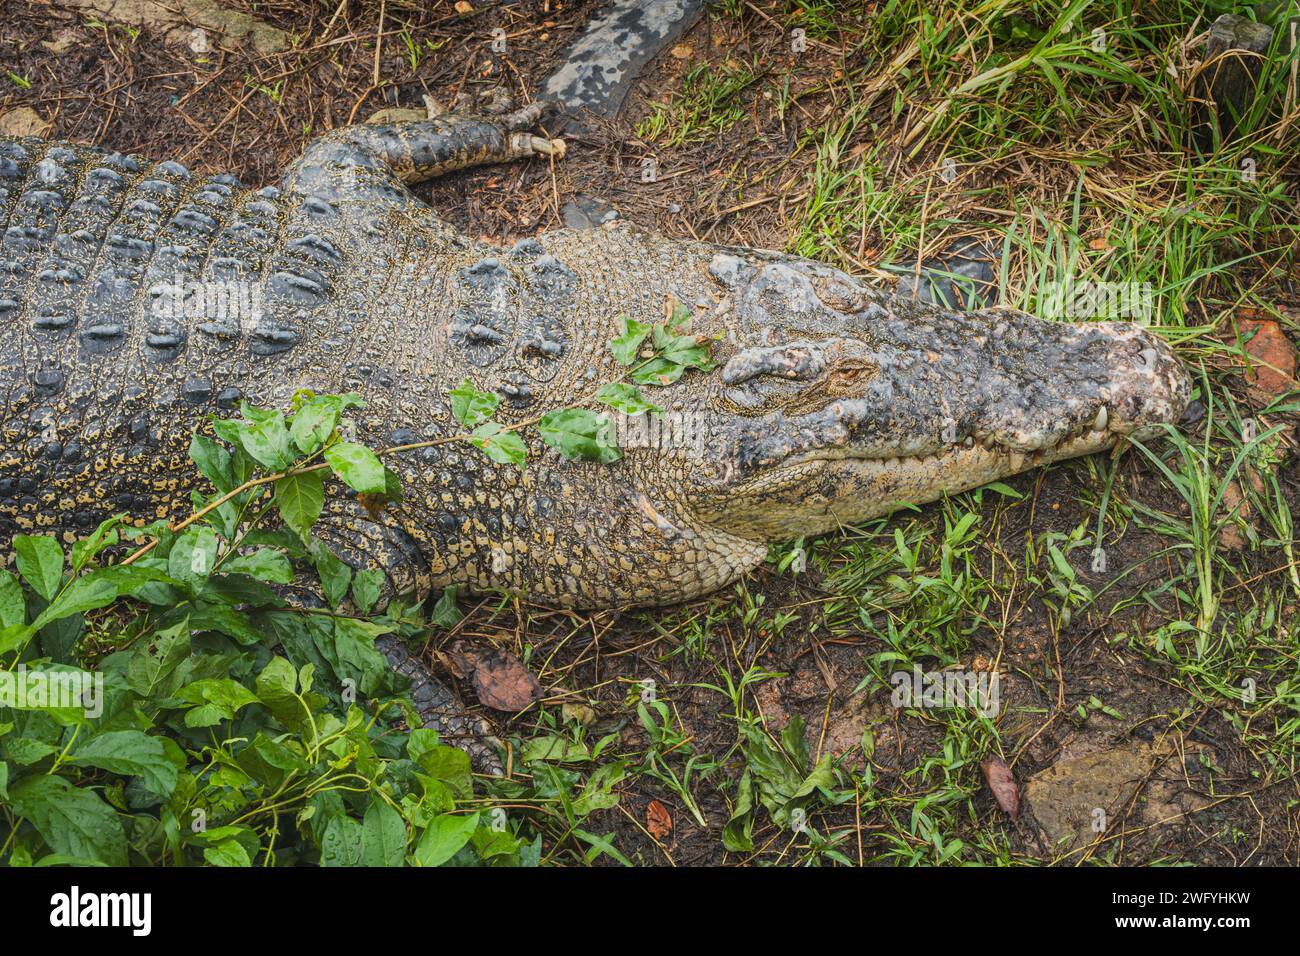 the Crocodile taking a rest on the edge of the swamp Stock Photo